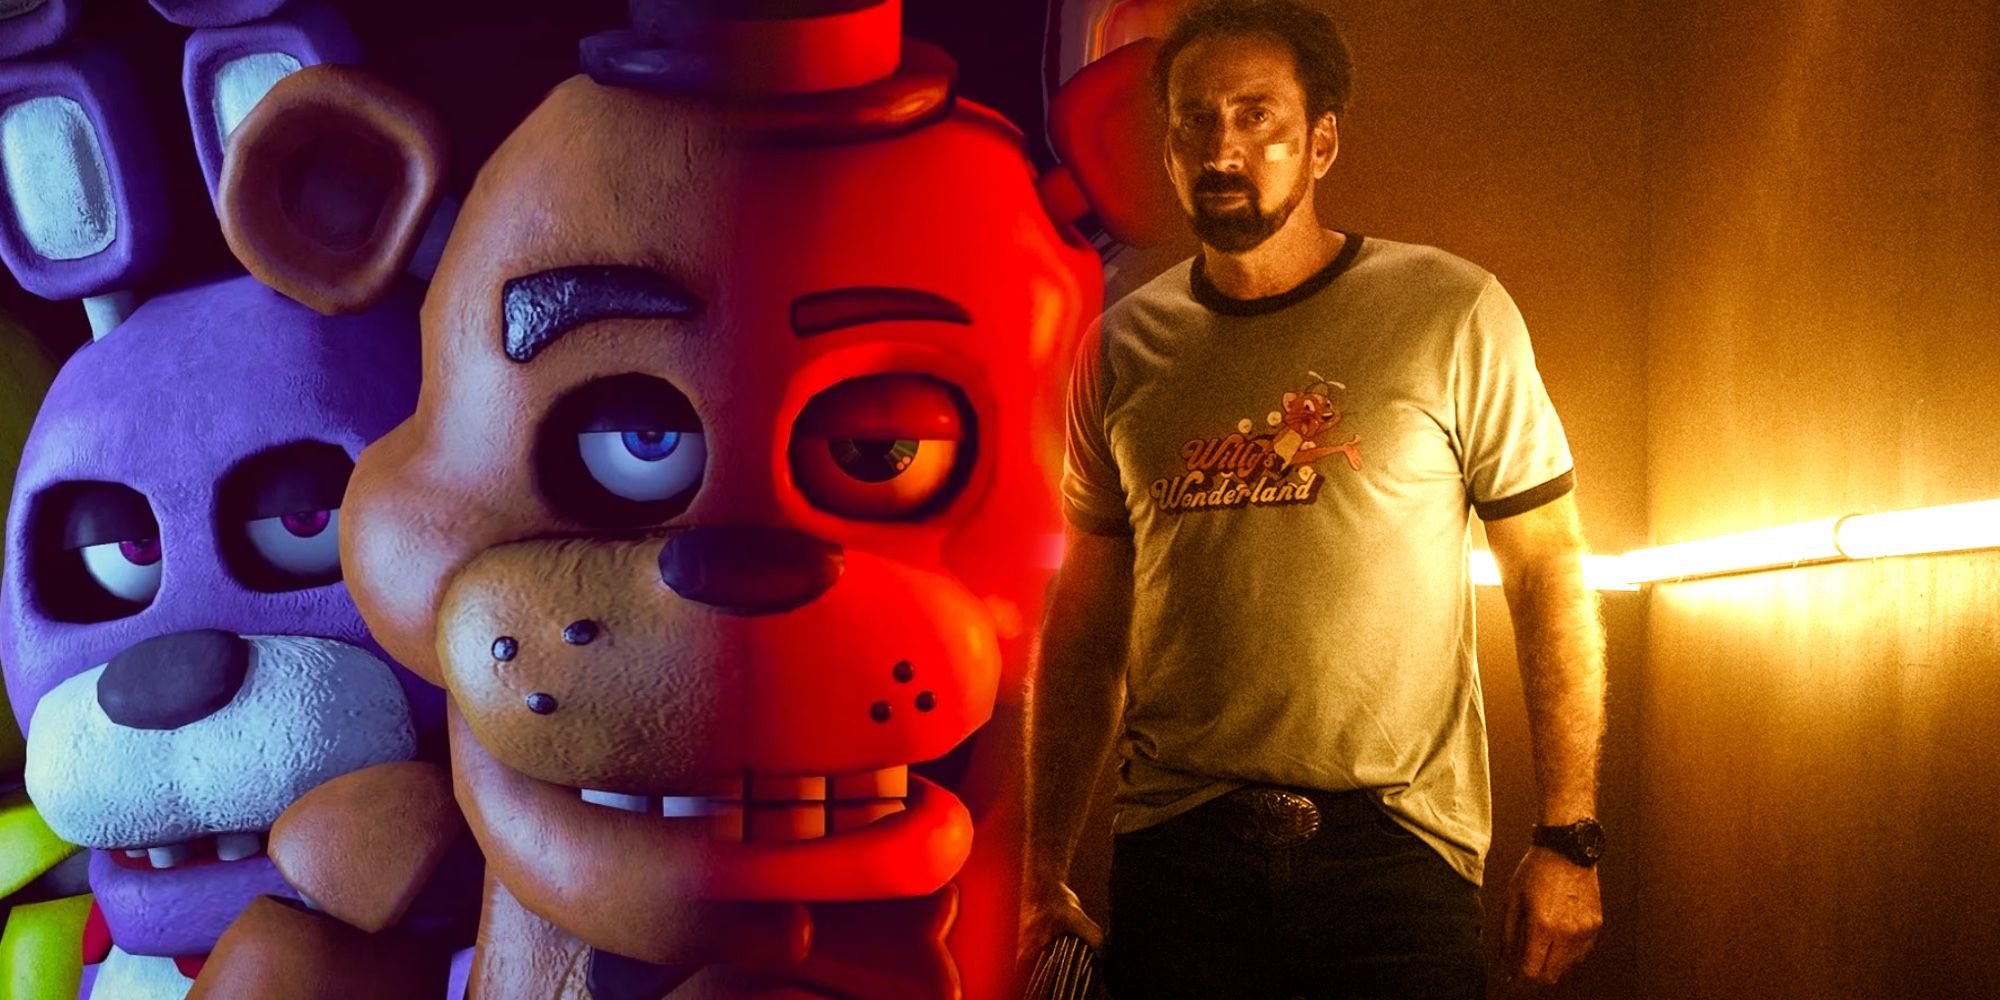 Nicolas Cage in Willy's Wonderland with Five Nights At Freddy's Creatures